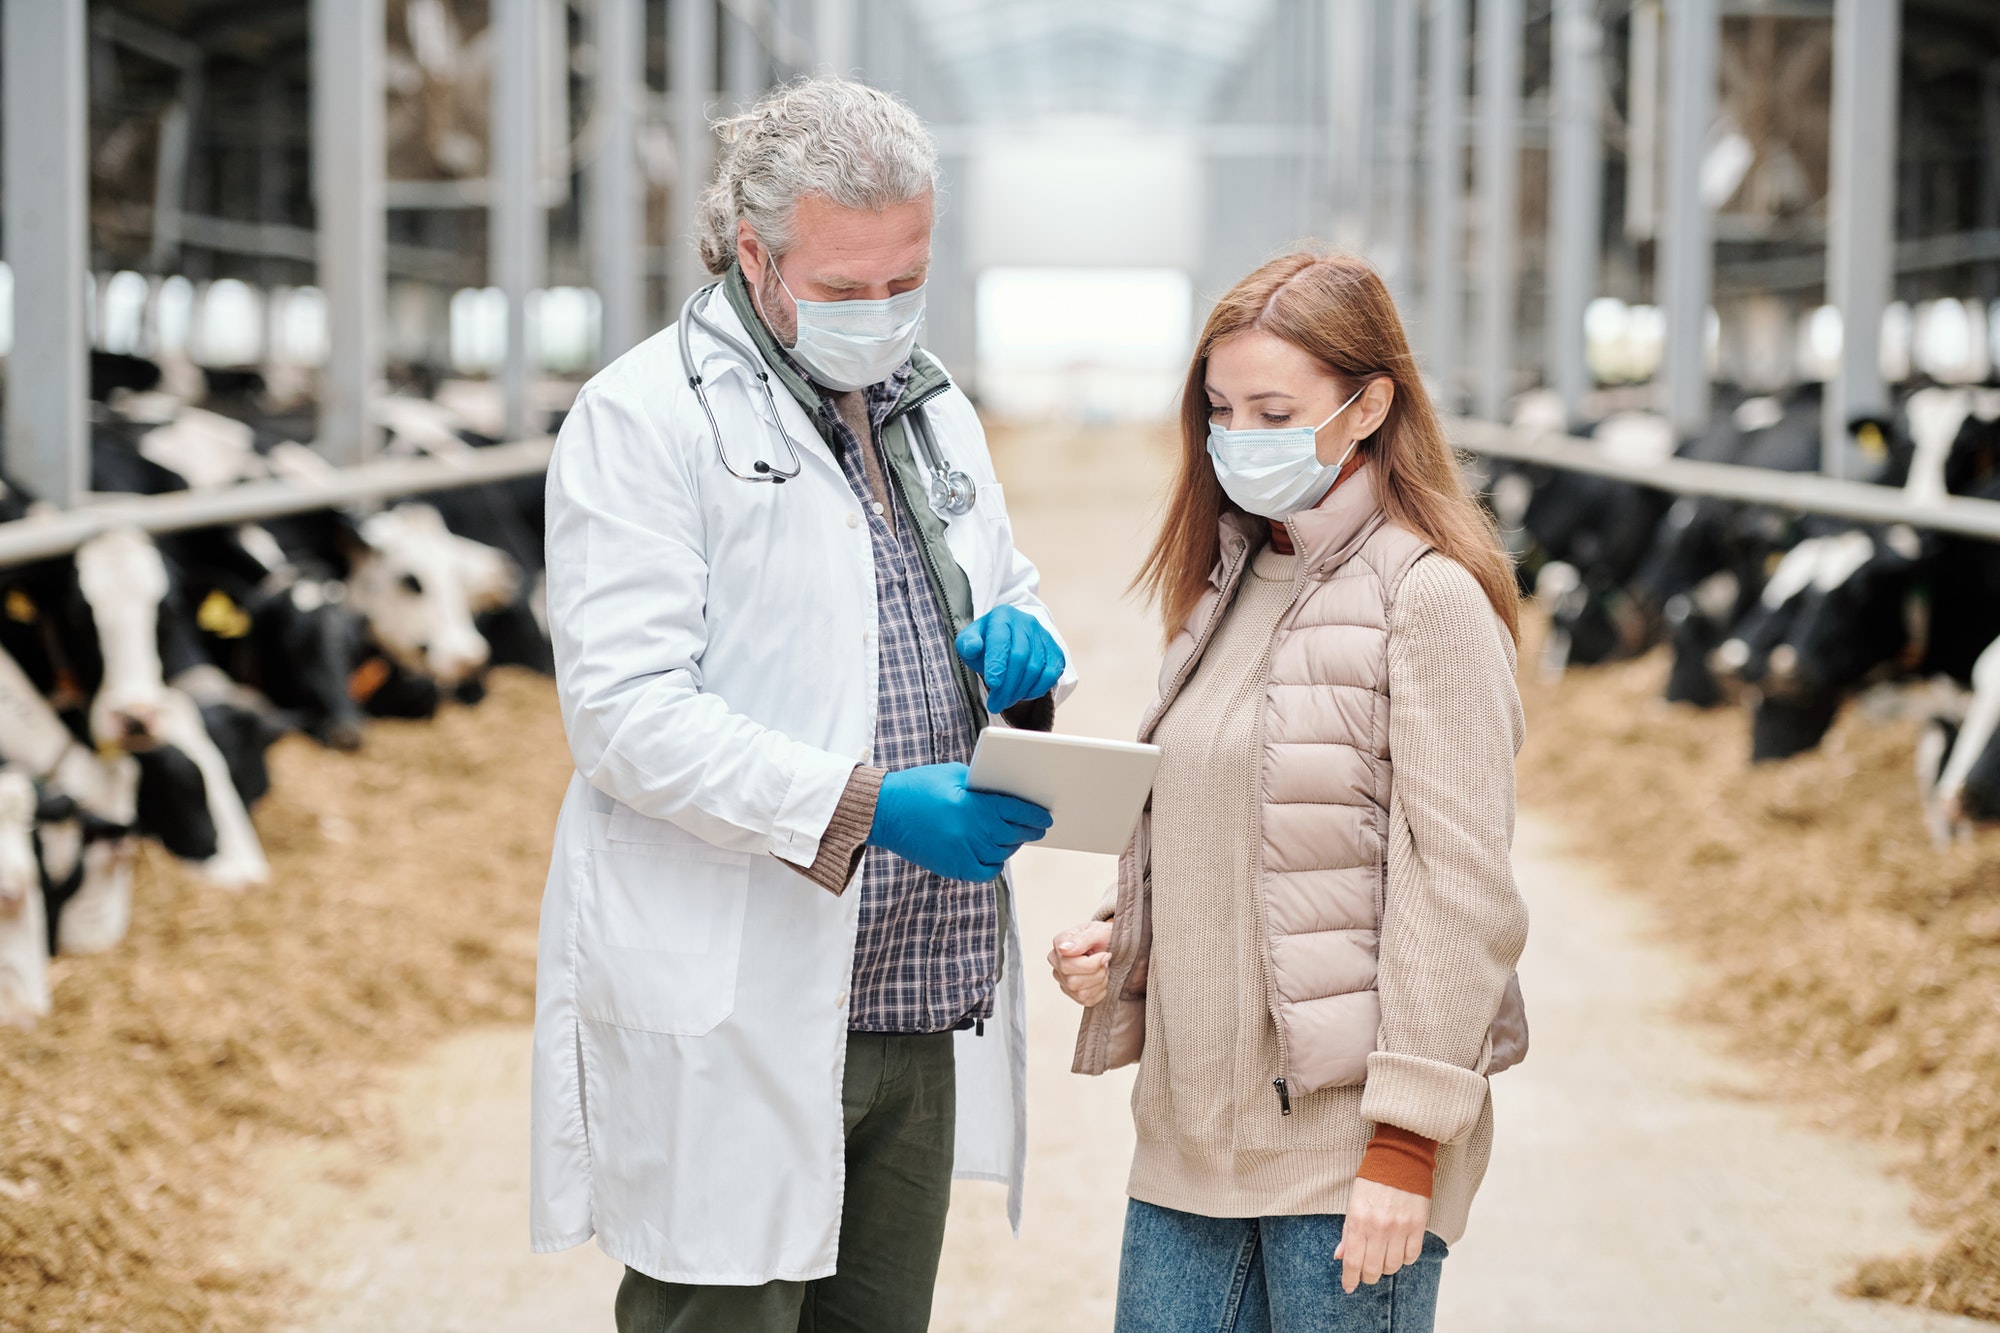 Mature male veterinarian showing online medical information to farm worker